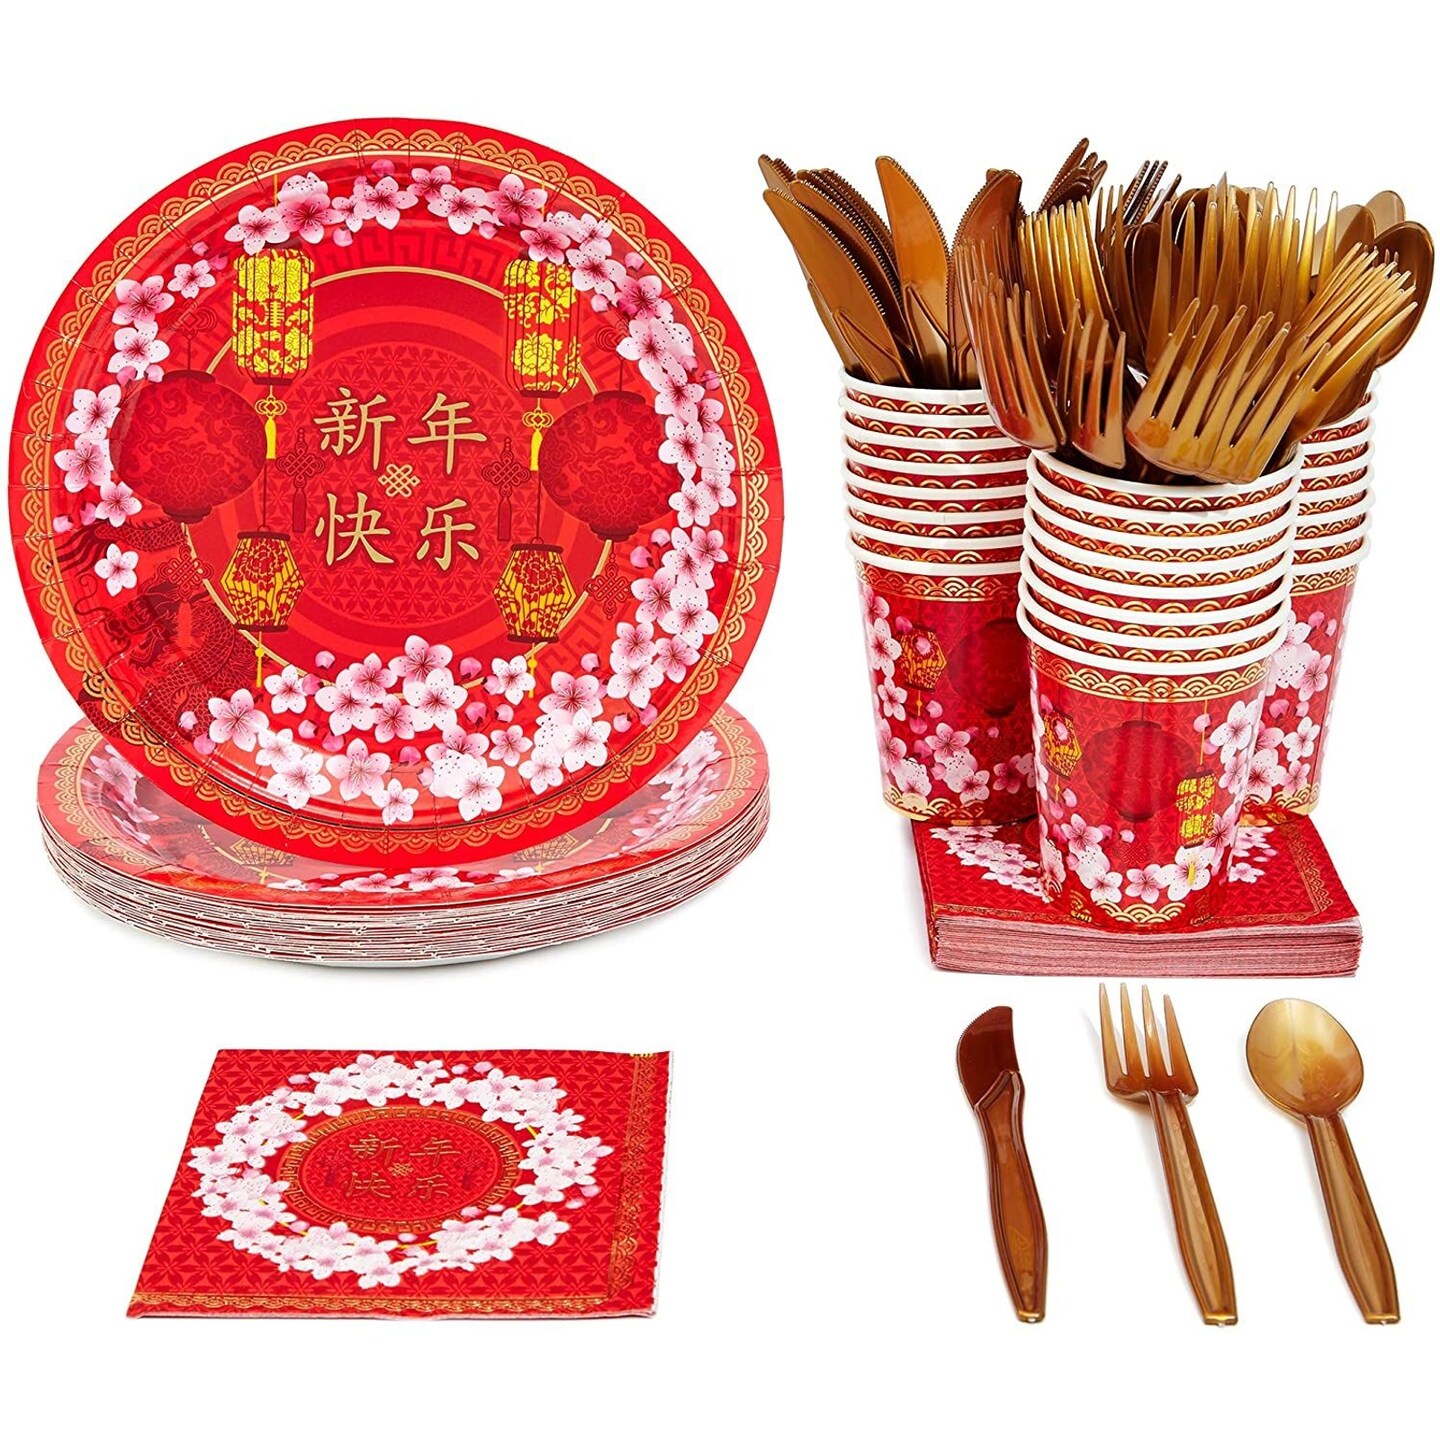 Chinese New Year Party Supplies - Great Value